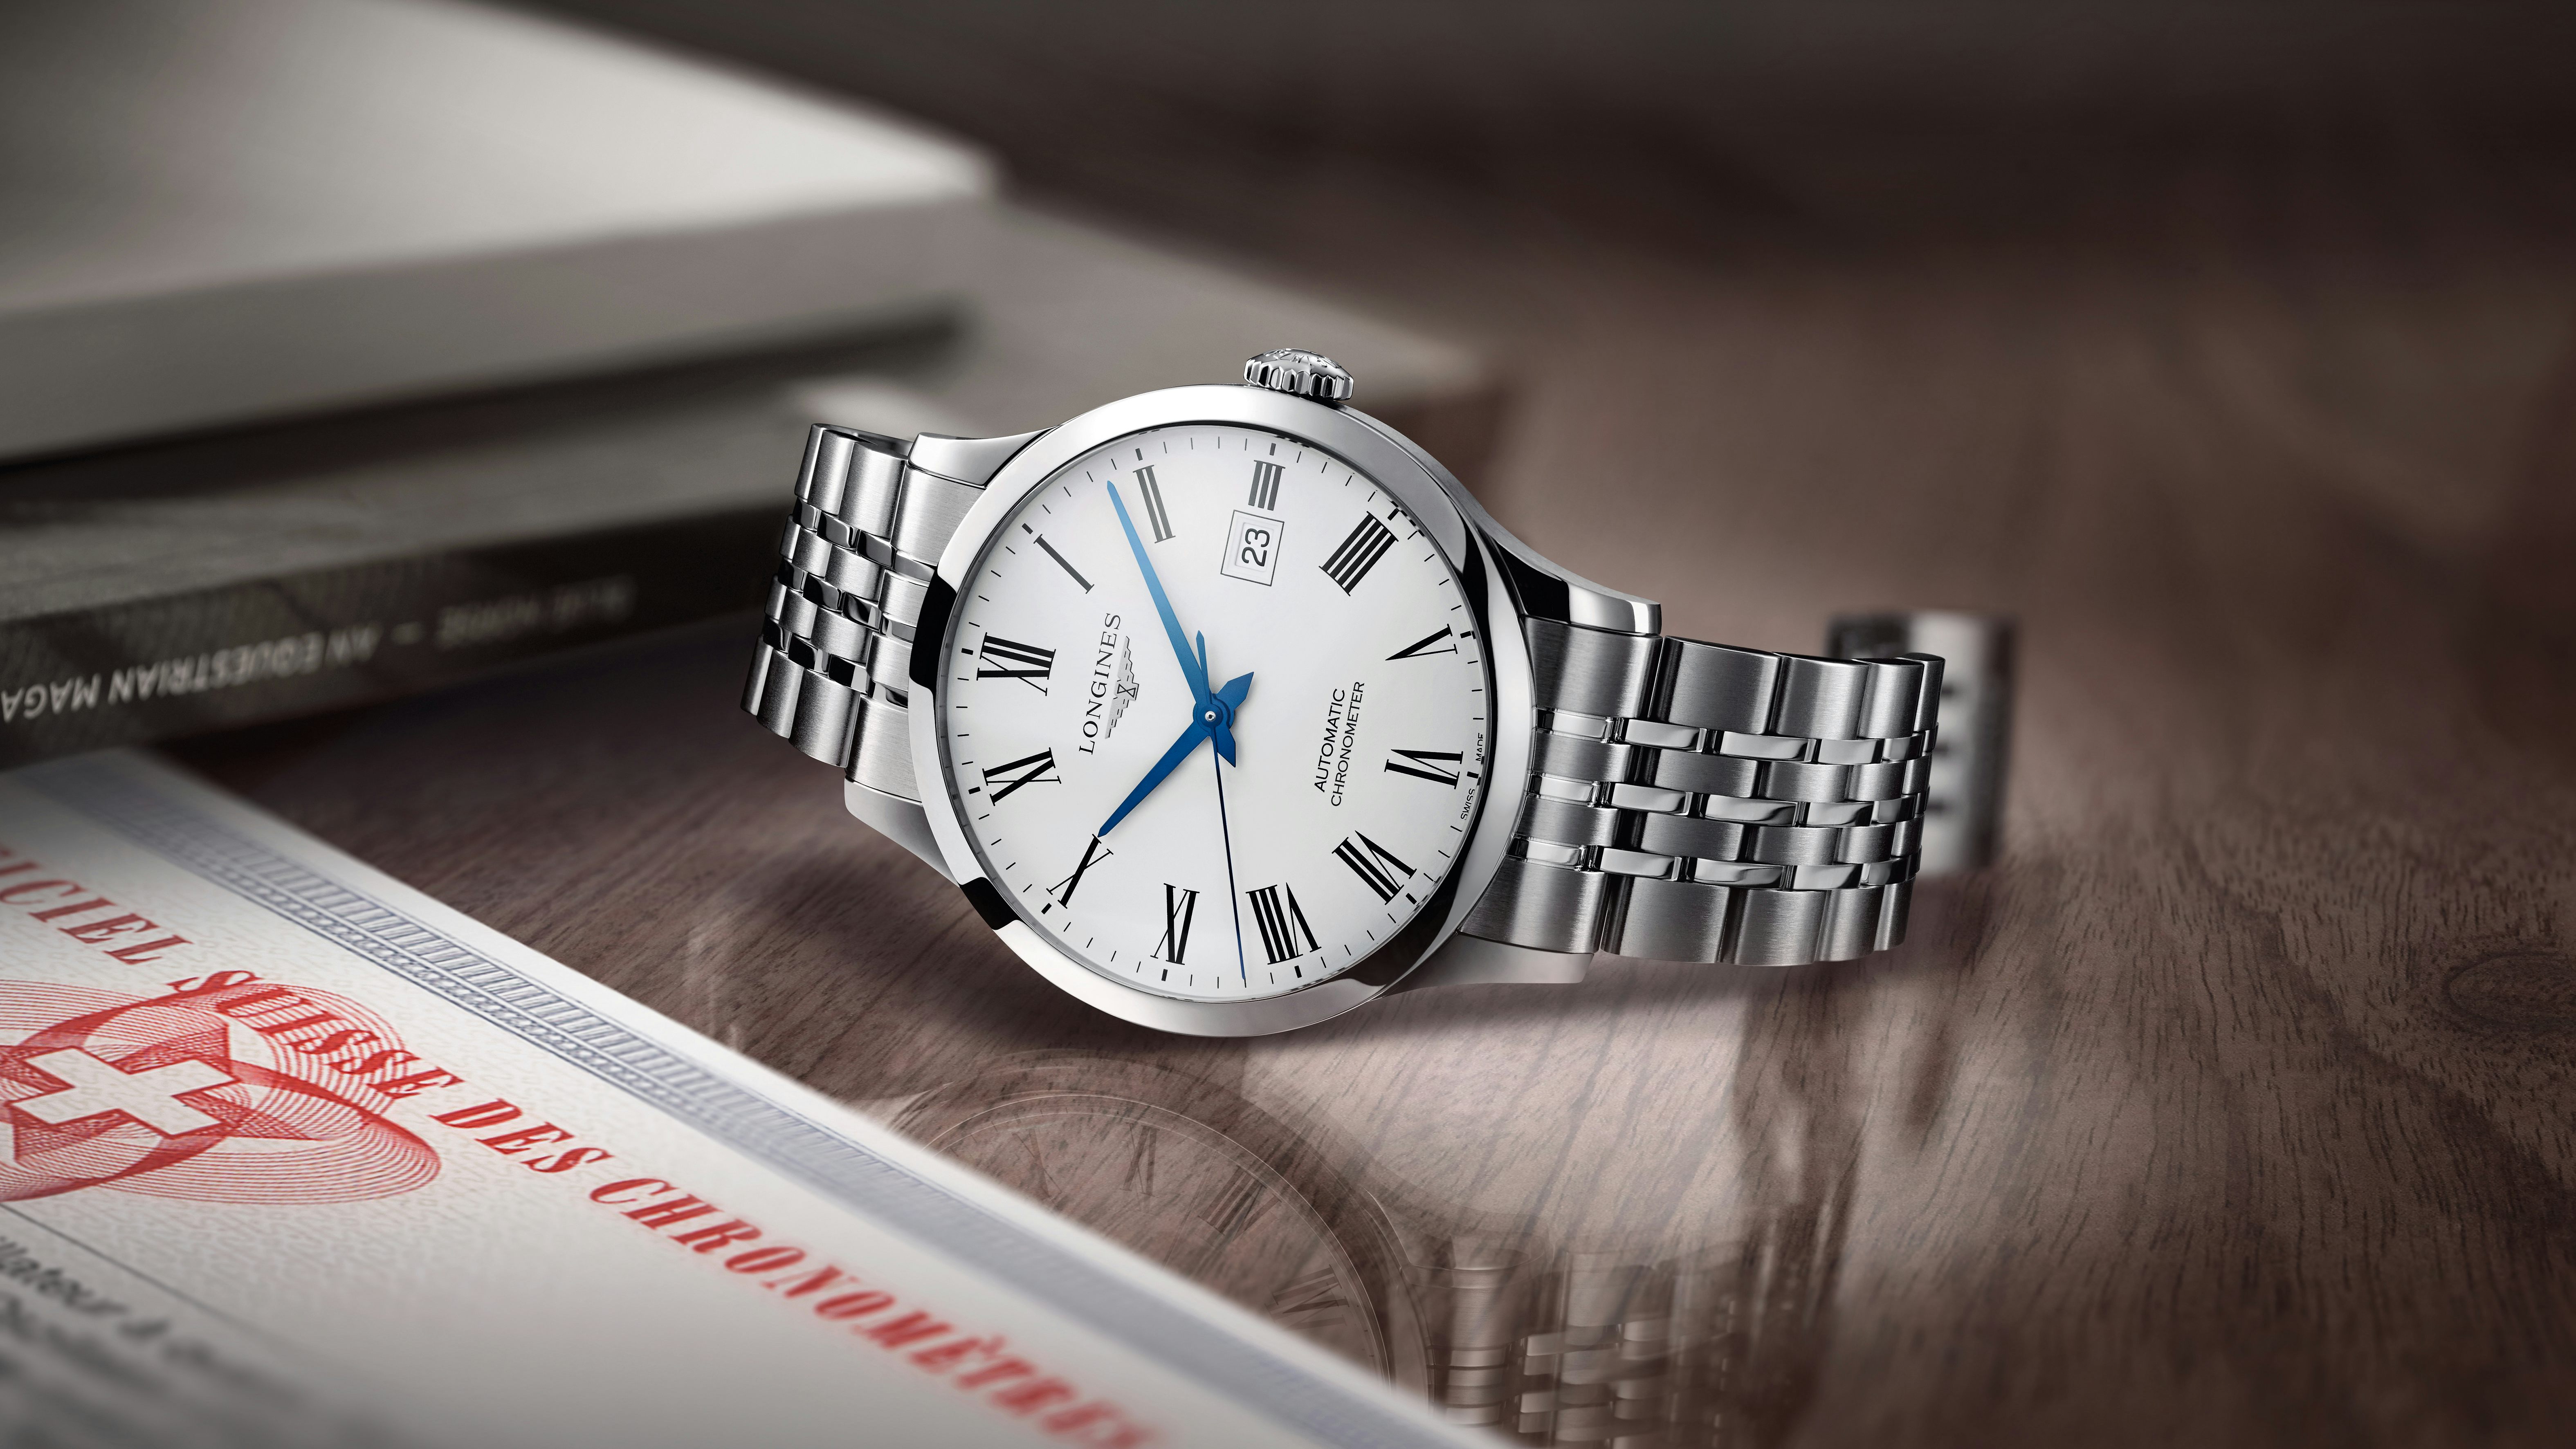 Watch Review: Longines Record Heritage